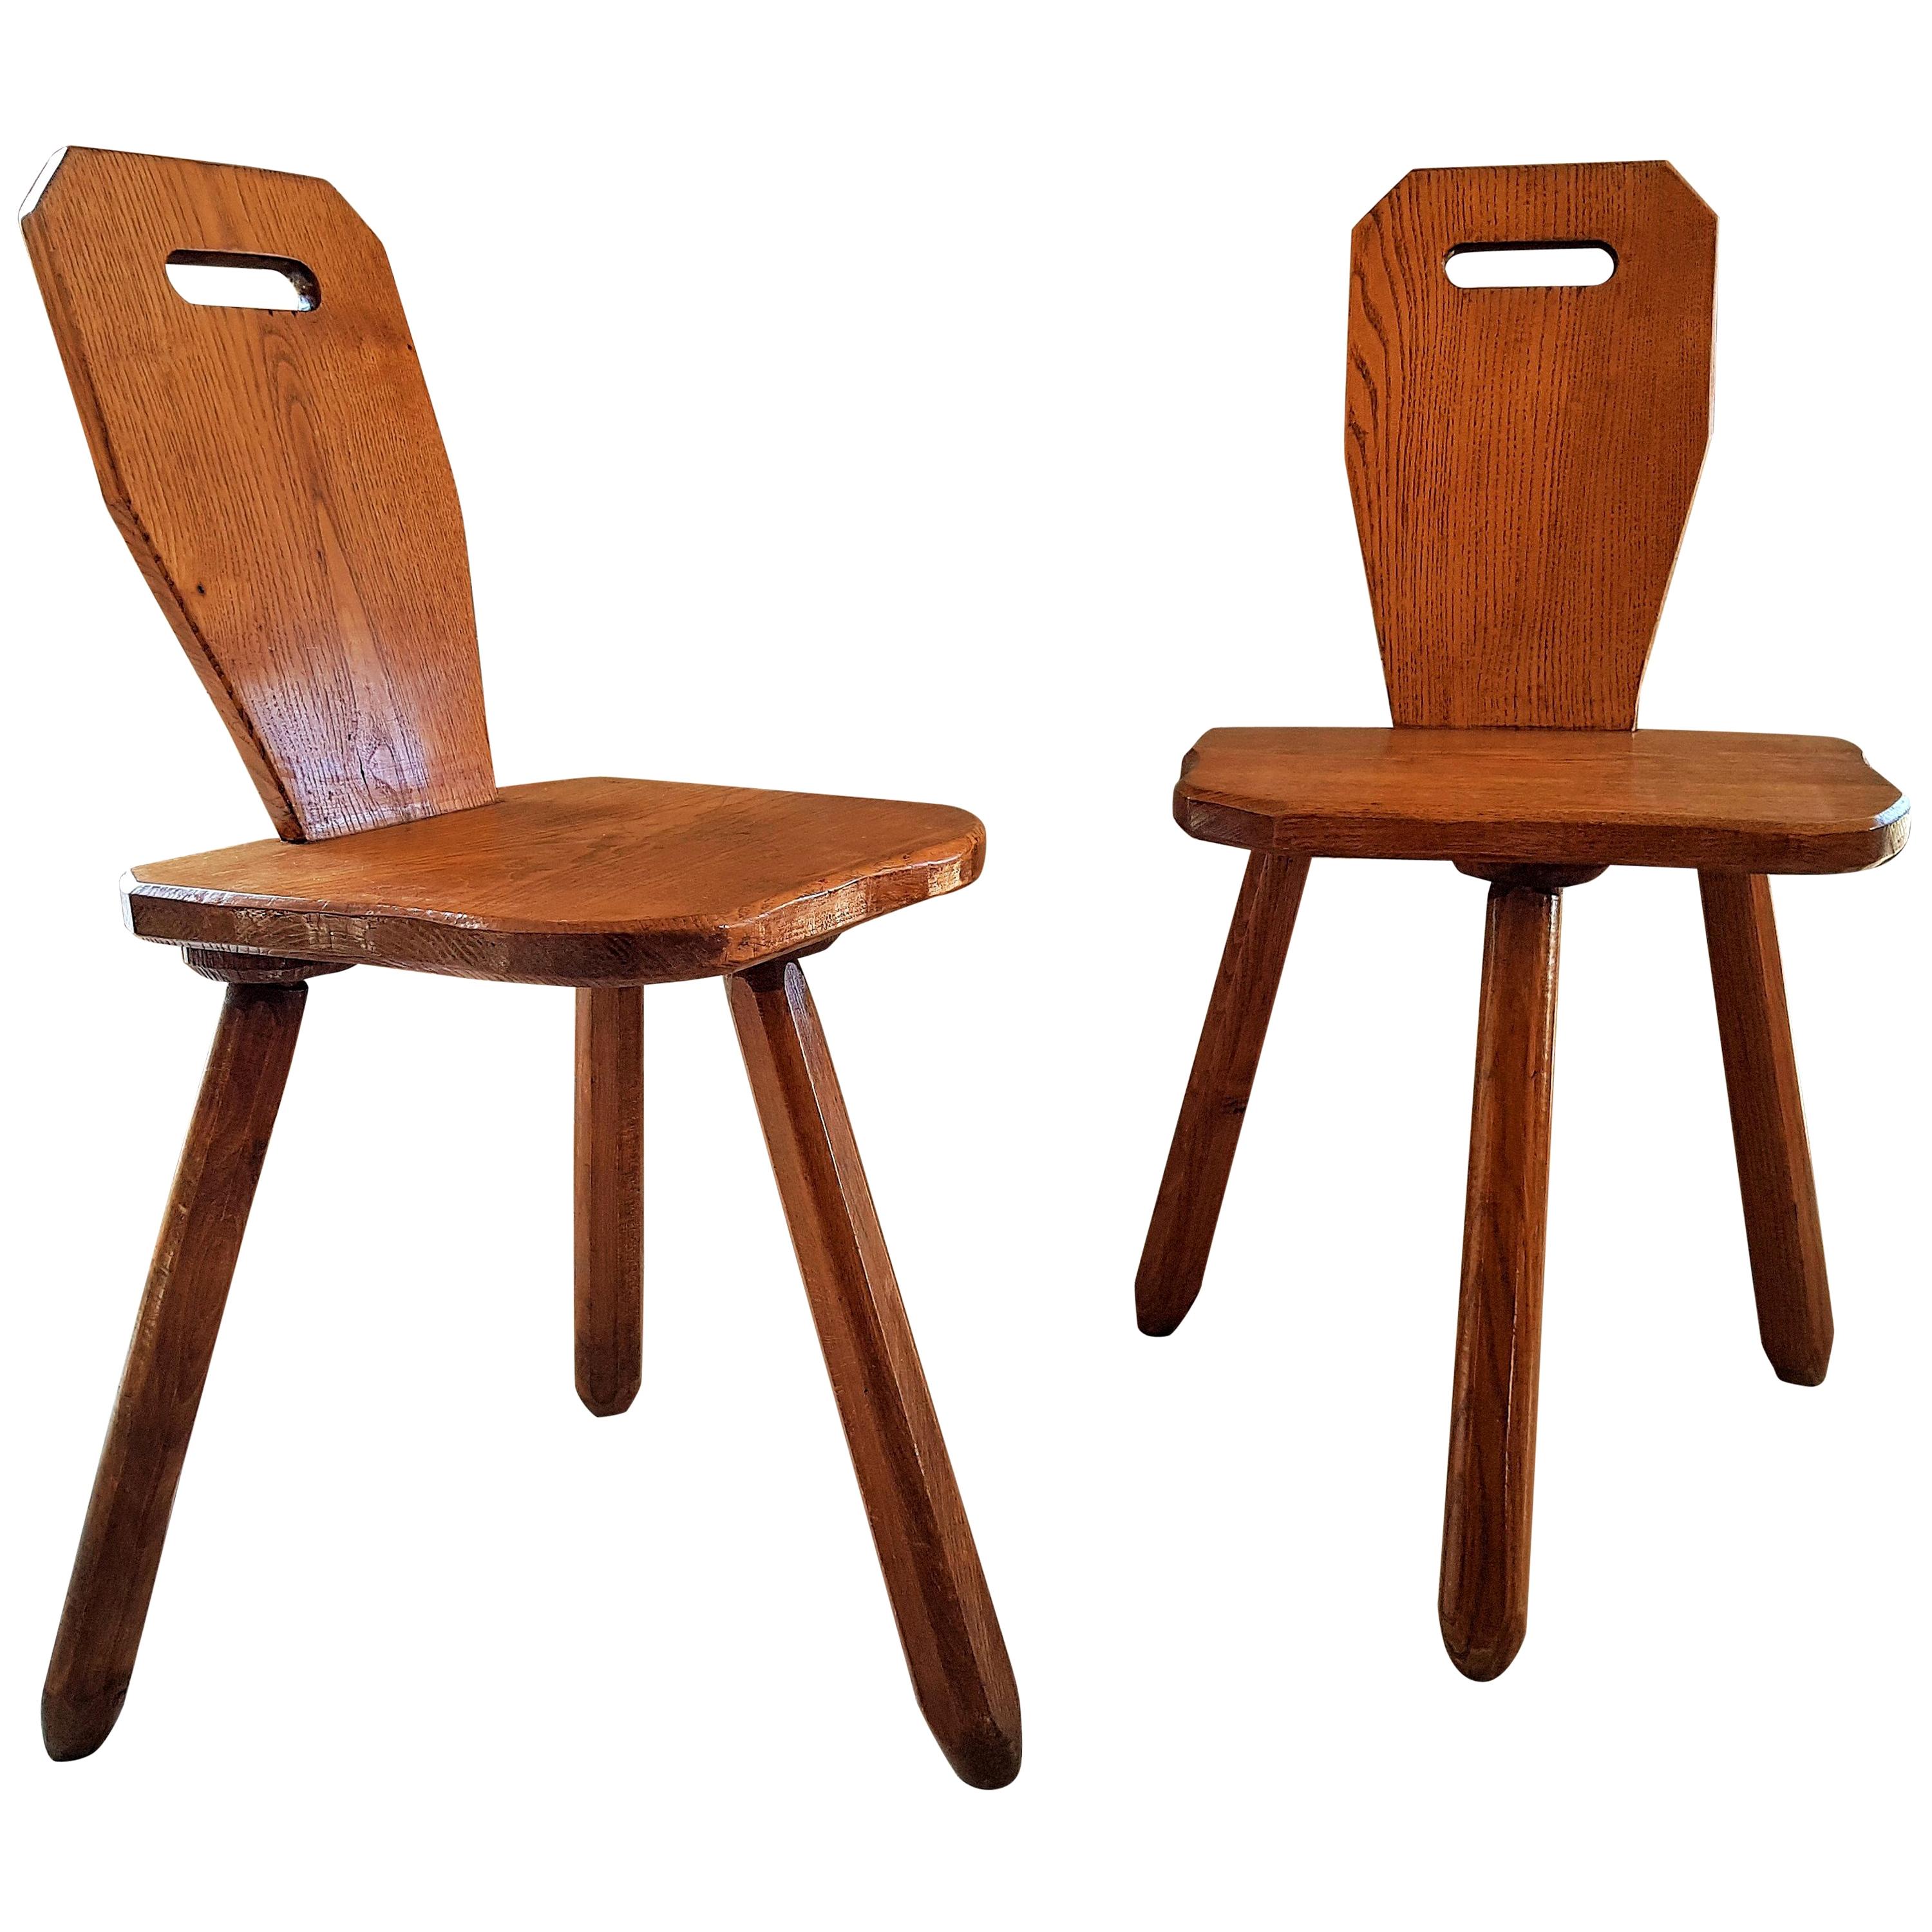 Midcentury primitive rustic Pair of Chairs Stools Style Perriand Les Arcs, 1950s For Sale